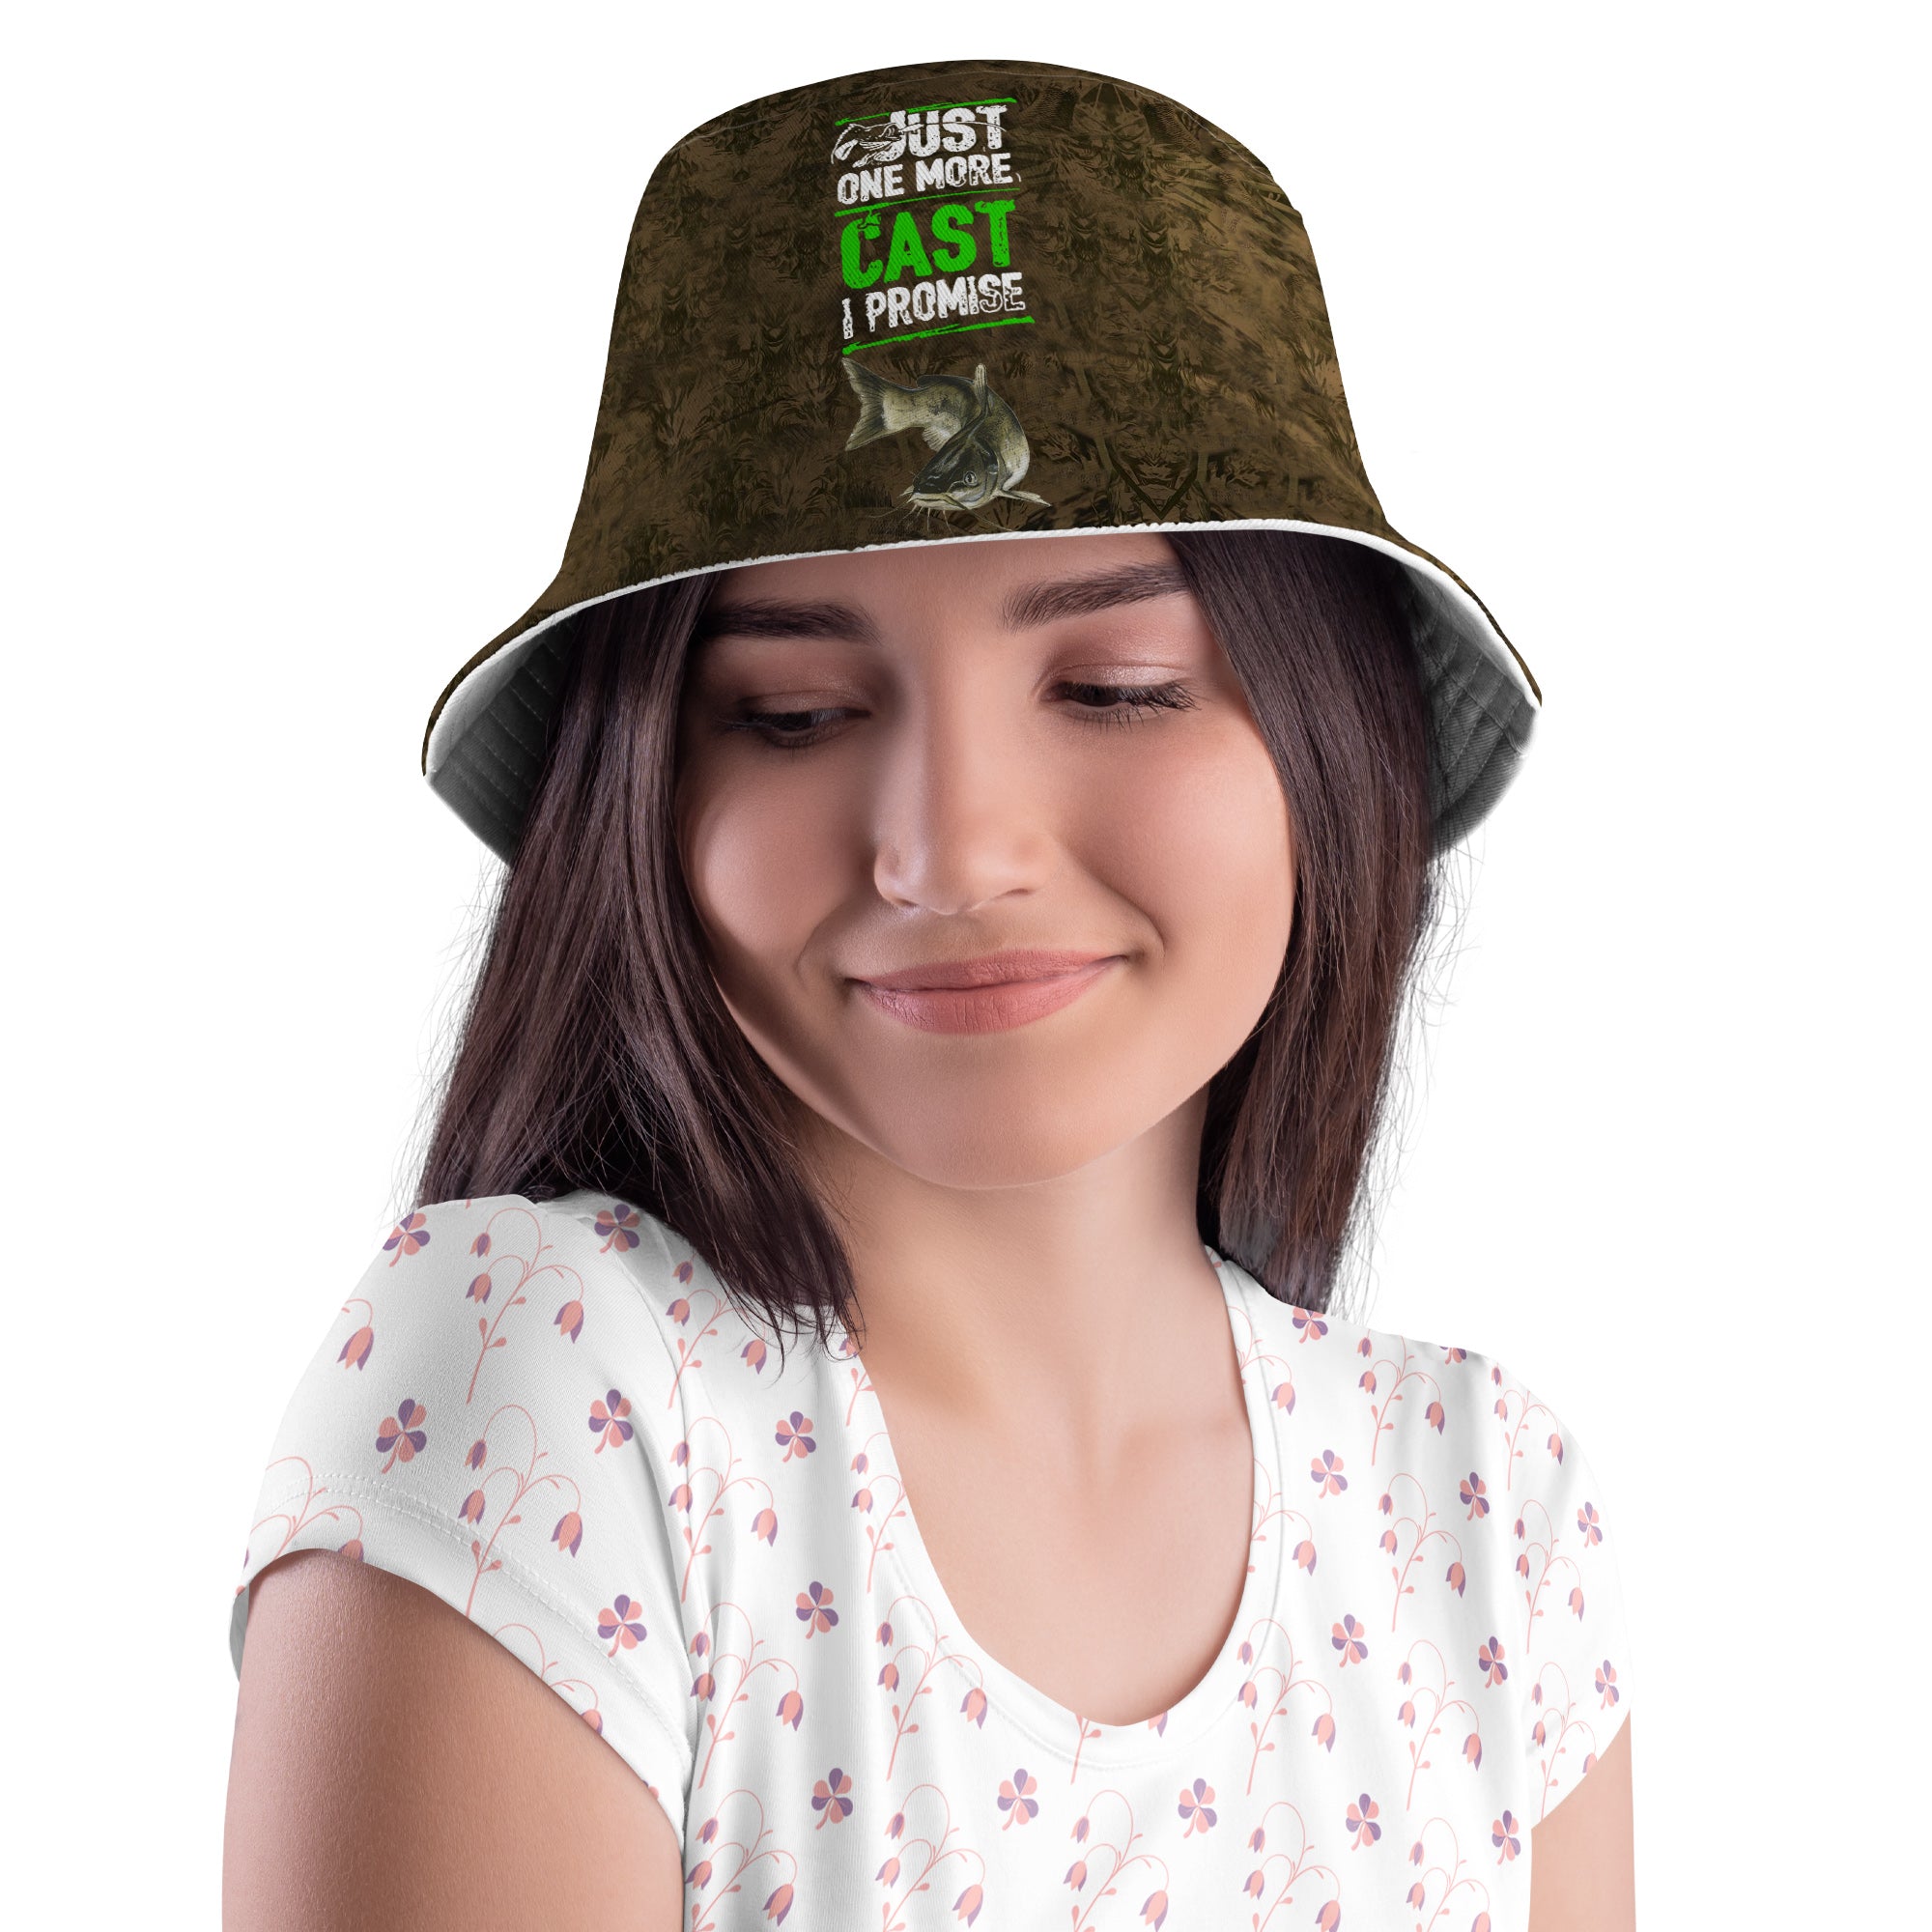 Just One More Cast I Promise Fishing Bucket Hat